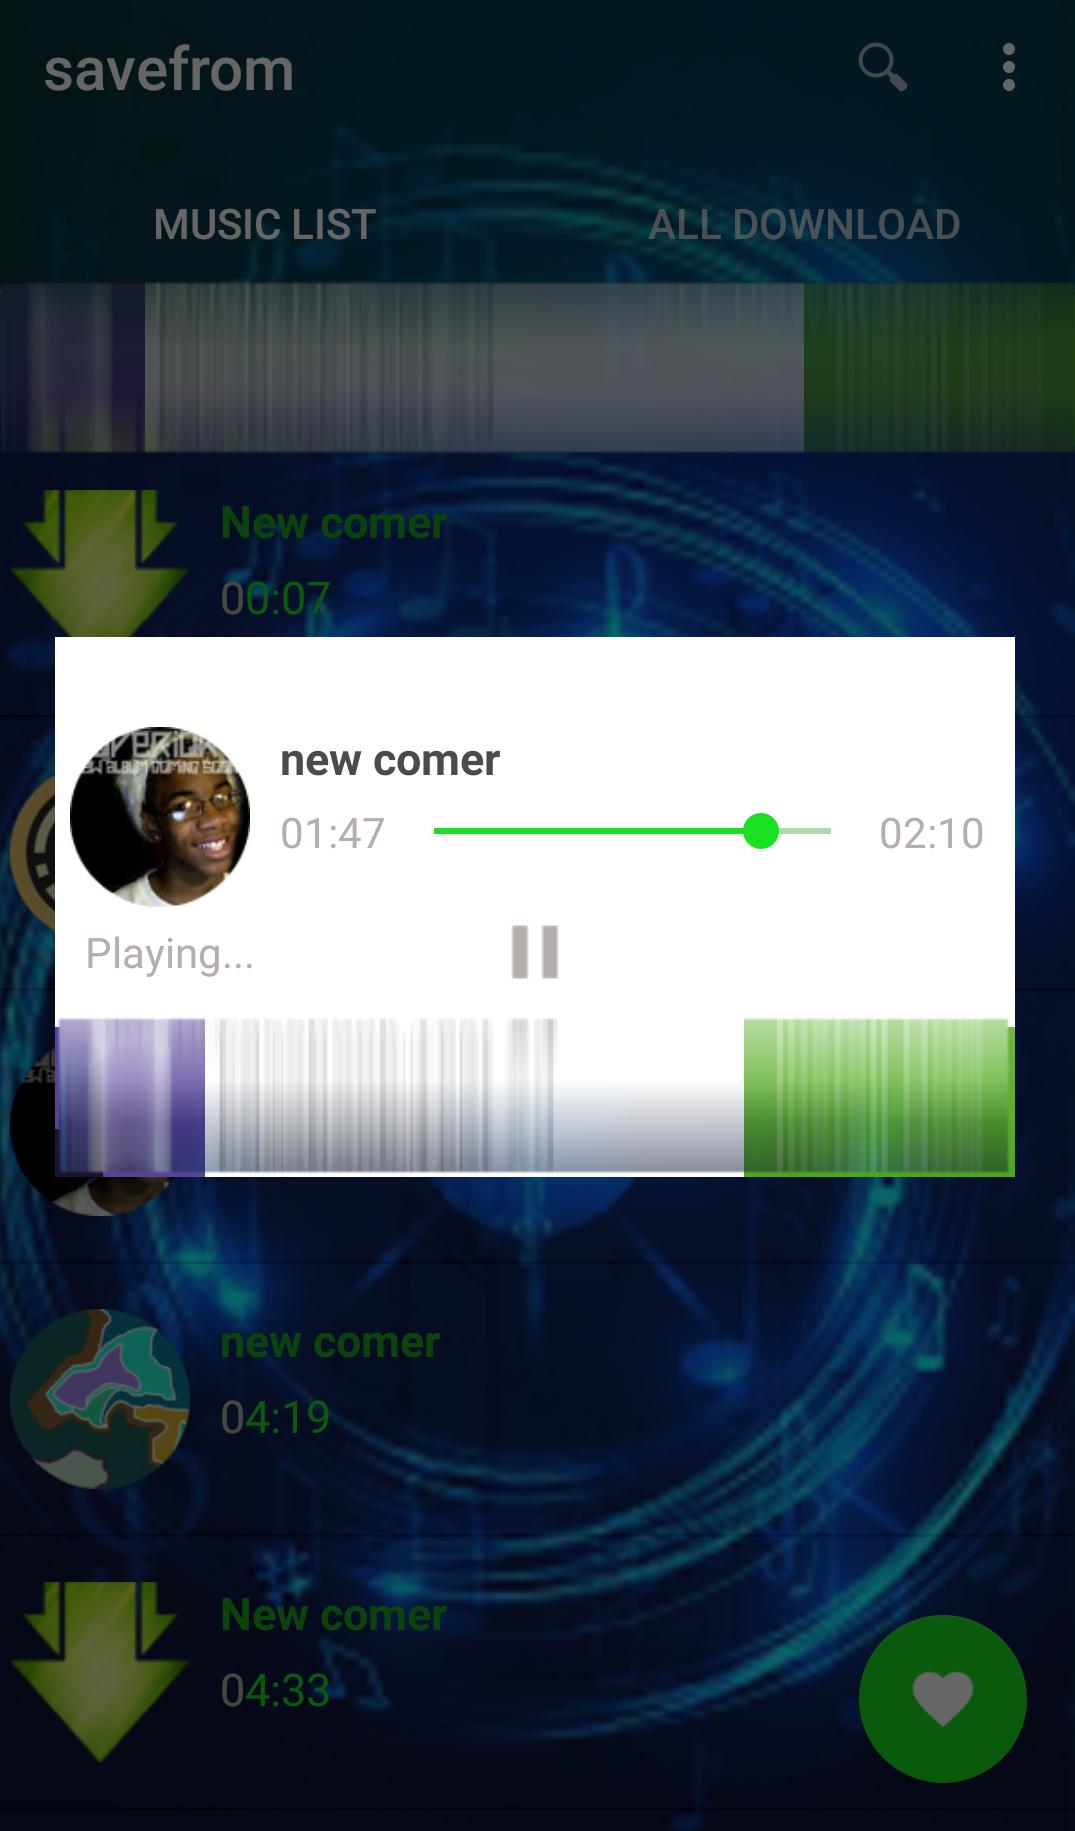 savefrom.net music - mp3 download for Android - APK Download